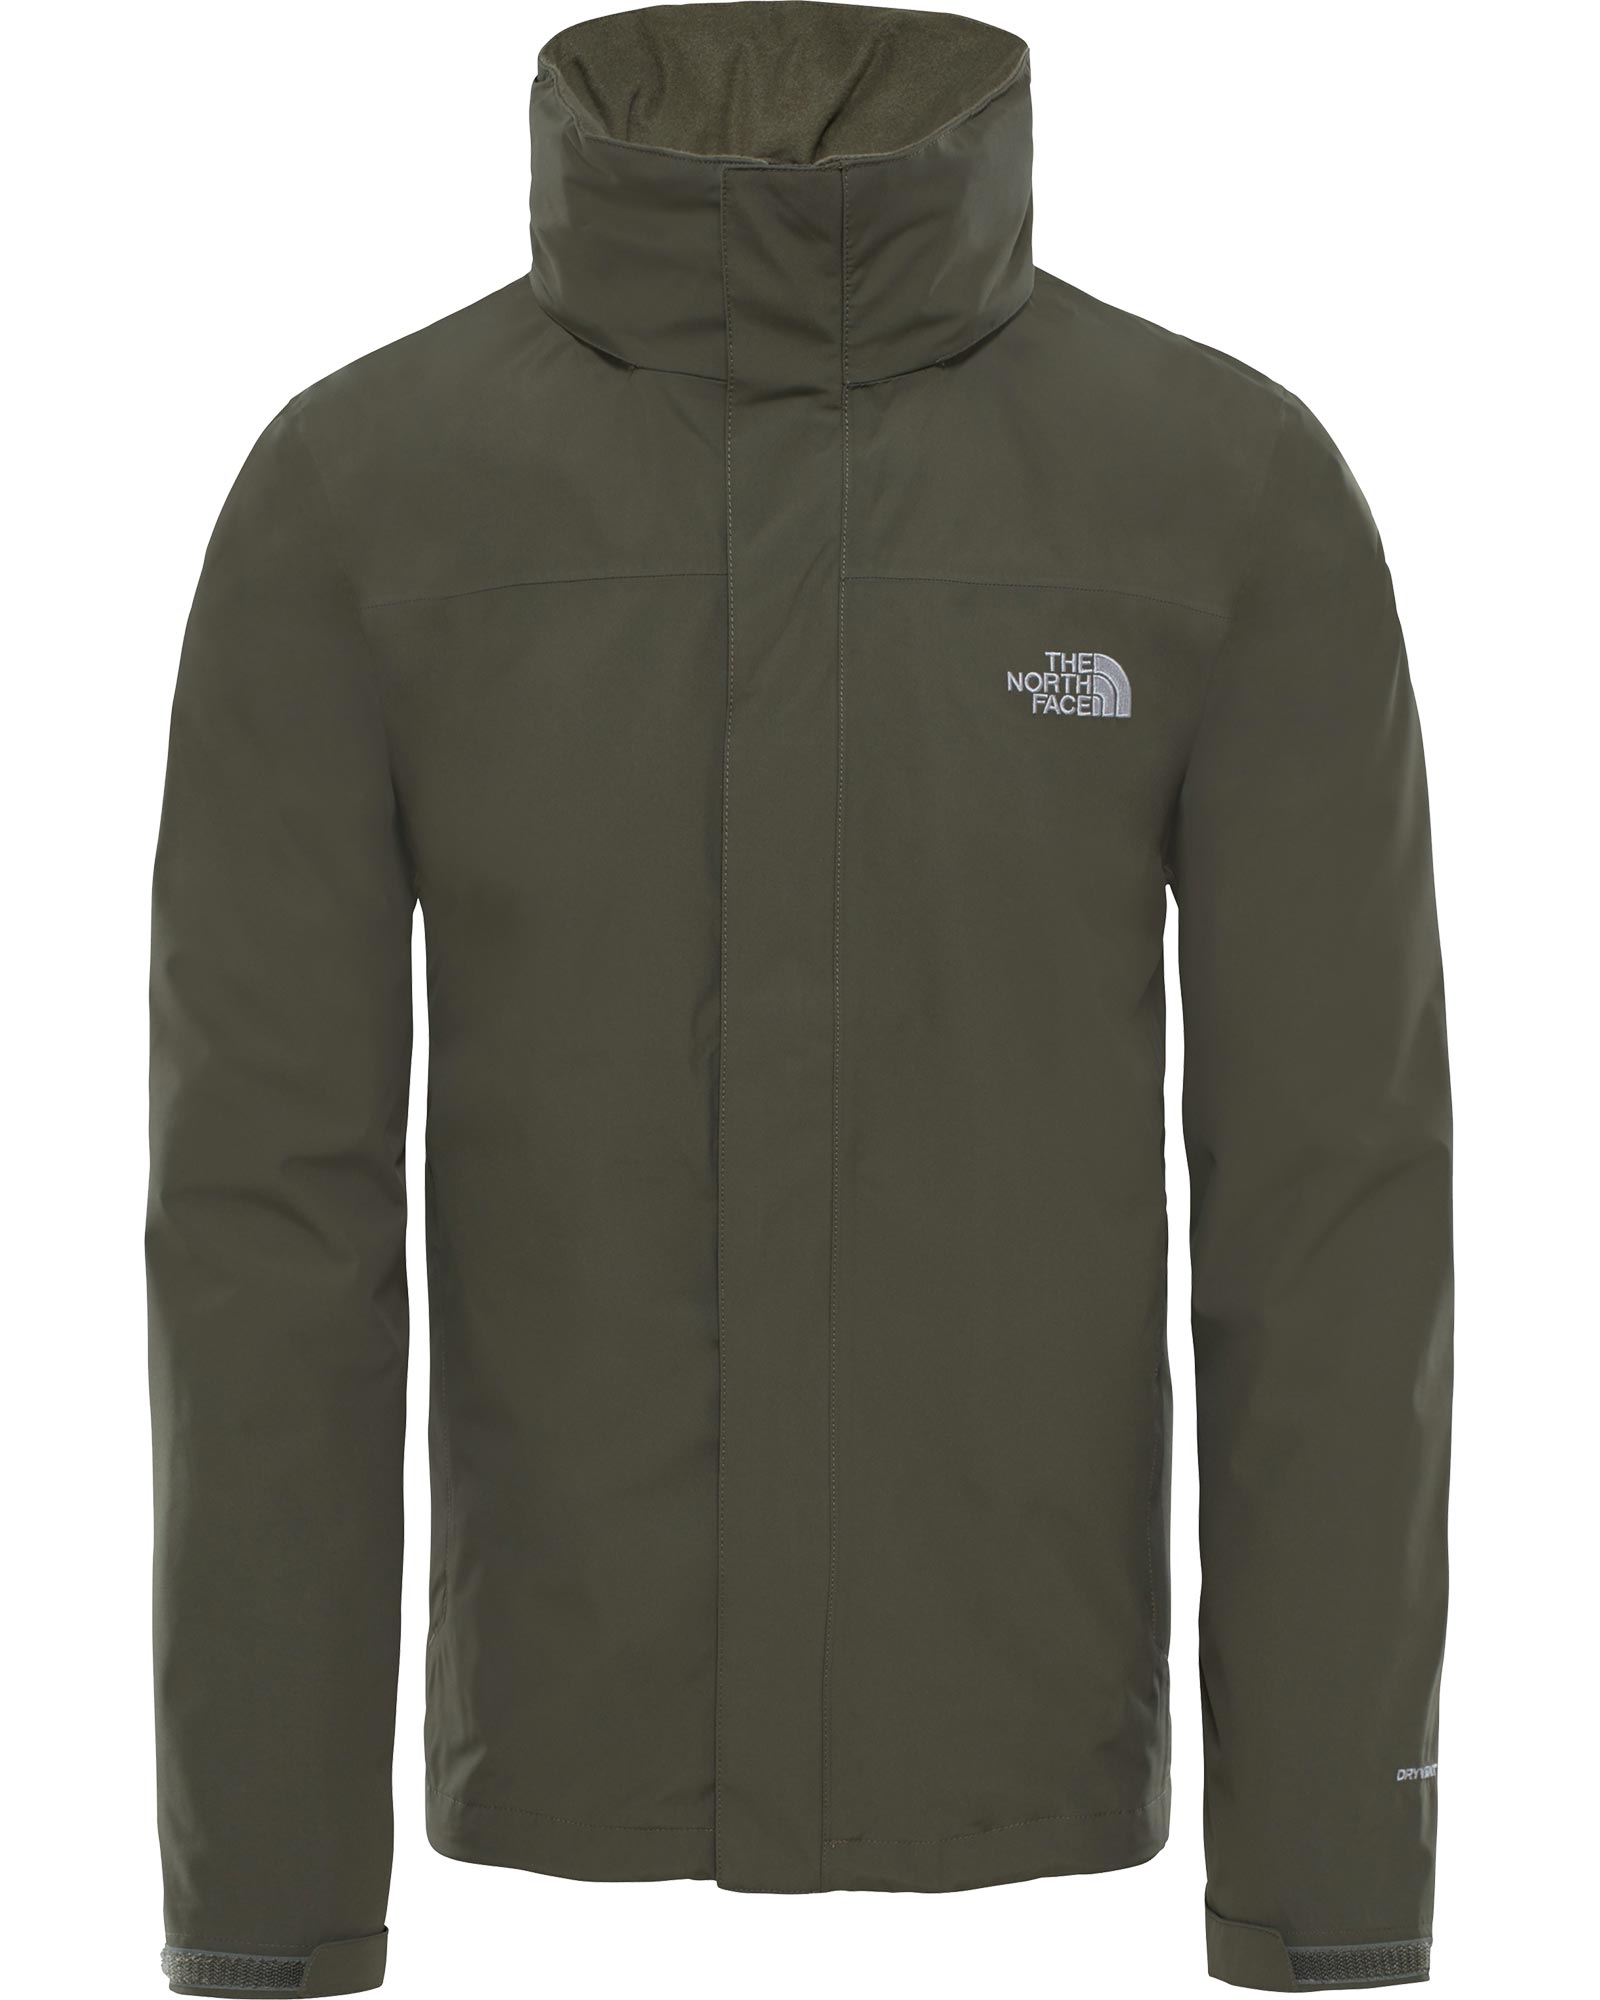 The North Face Sangro Dryvent Mens Jacket